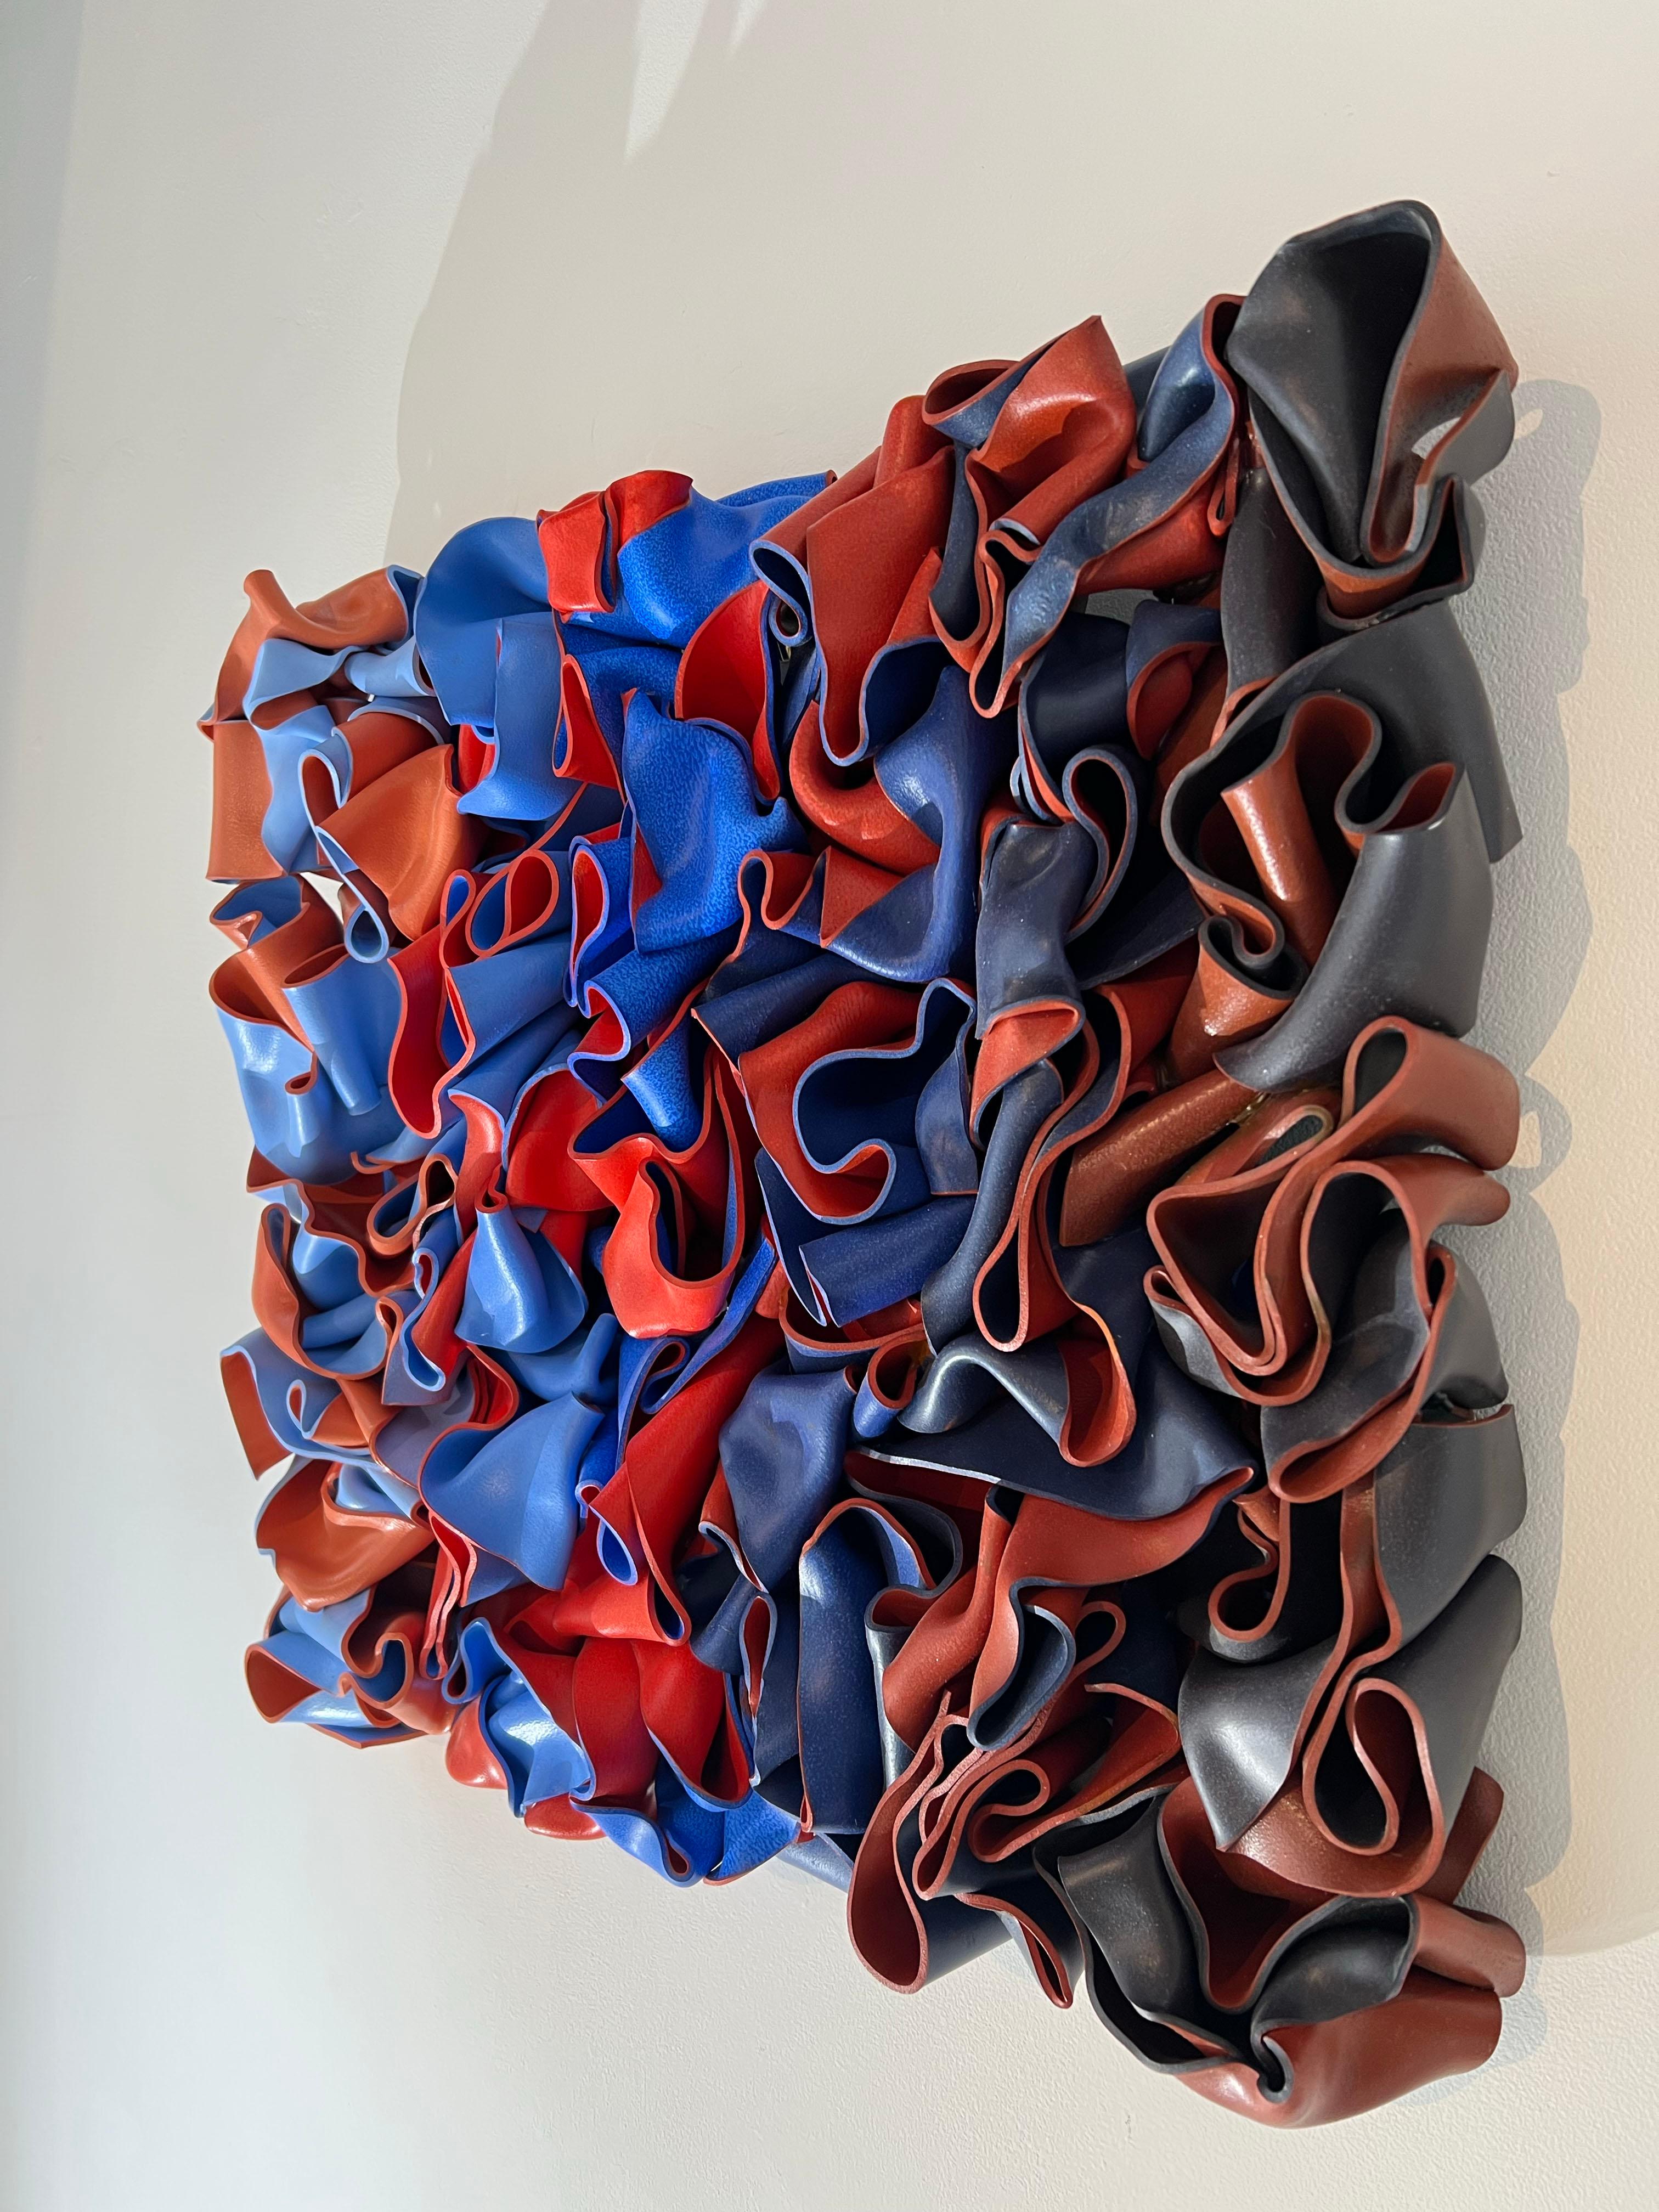 An abstract sculpture hand molded with styrene. This piece is very consist of many shades of orange and blue, contrasting against each other. 

Rick Lazes is a three dimensional artist who works in a variety of media including wood, plaster,